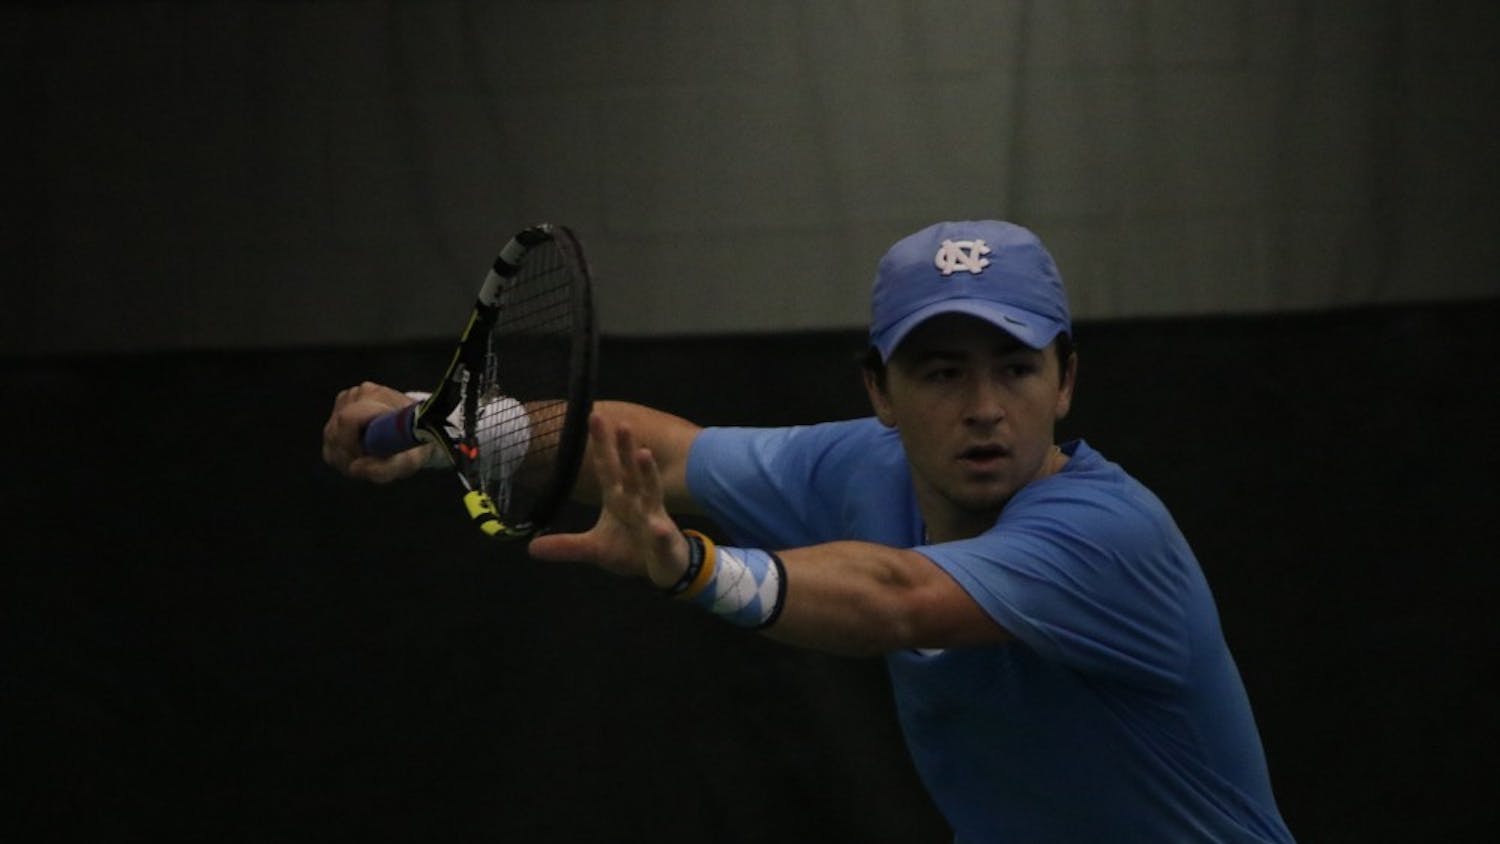 Junior Ronnie Schneider prepares to return a volley with a forehand hit in UNC men's tennis's route of Wofford on Sunday.